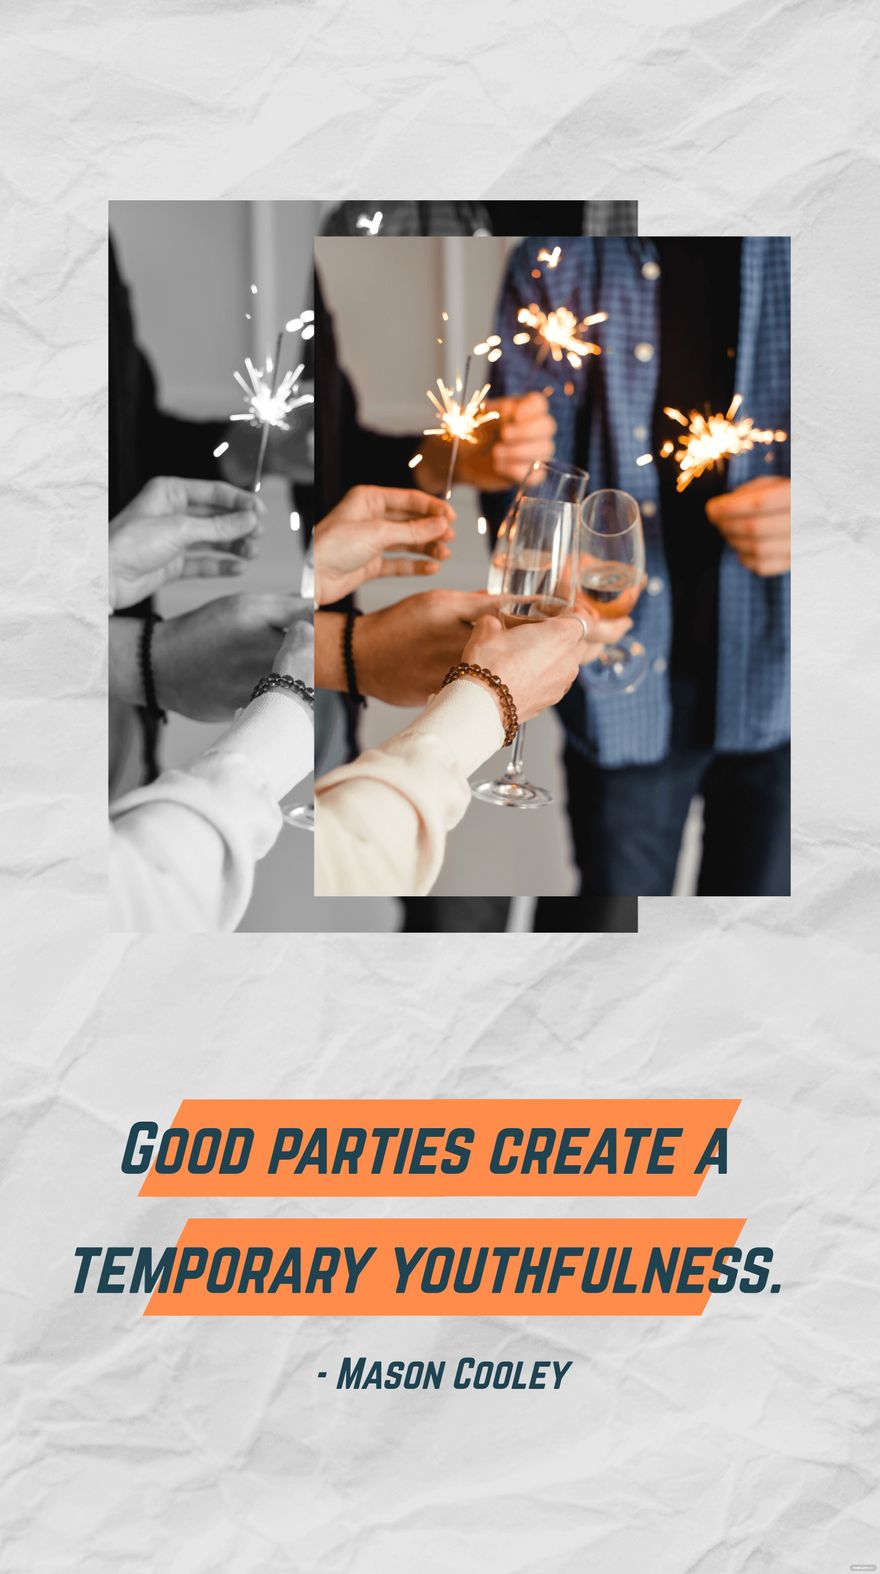 Good parties create a temporary youthfulness.